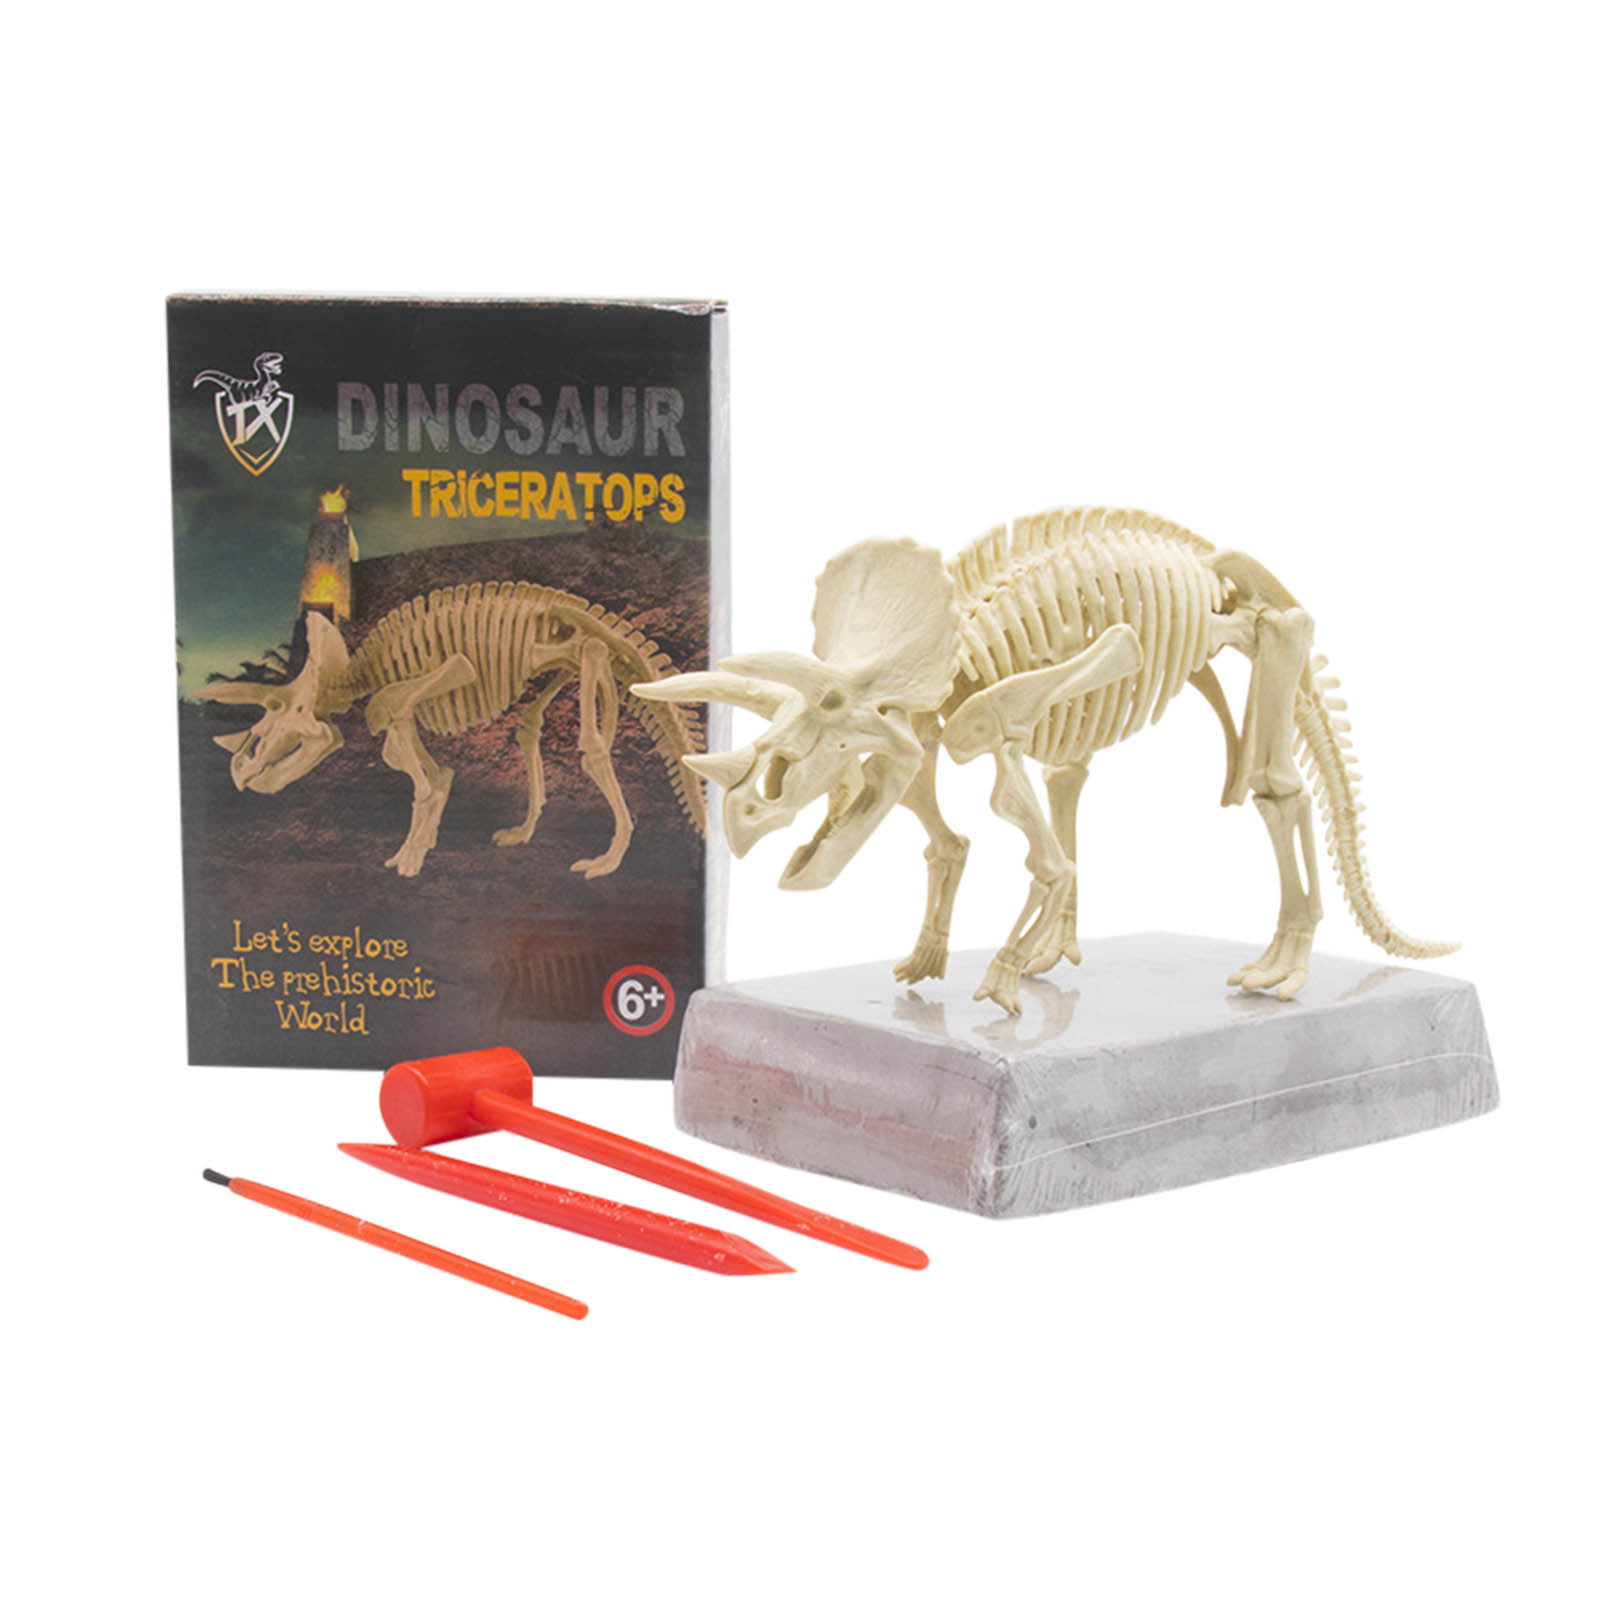 TY9162 DISCOVER DIG EXPLORE COLLECTABLE DINOSAUR SKULL FOSSIL EXCAVATION KIT 